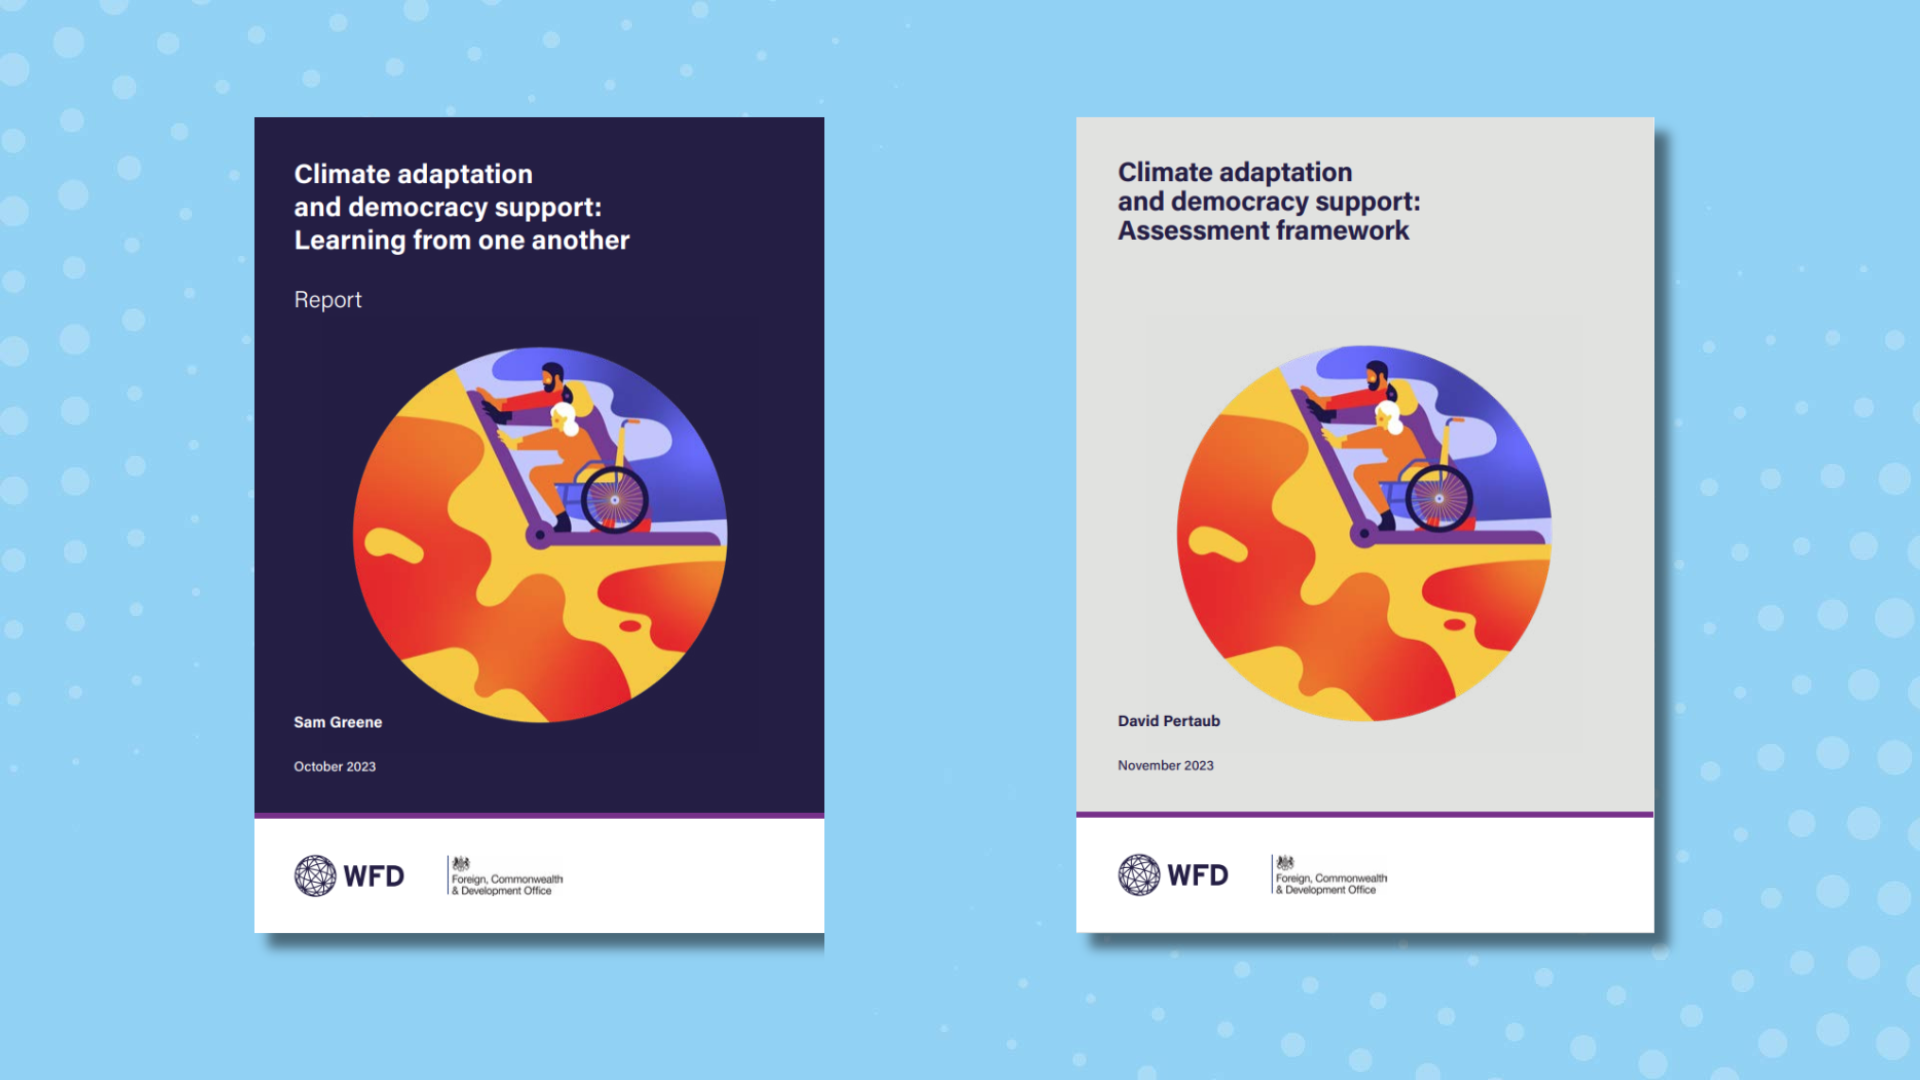 The front covers of the report and framework